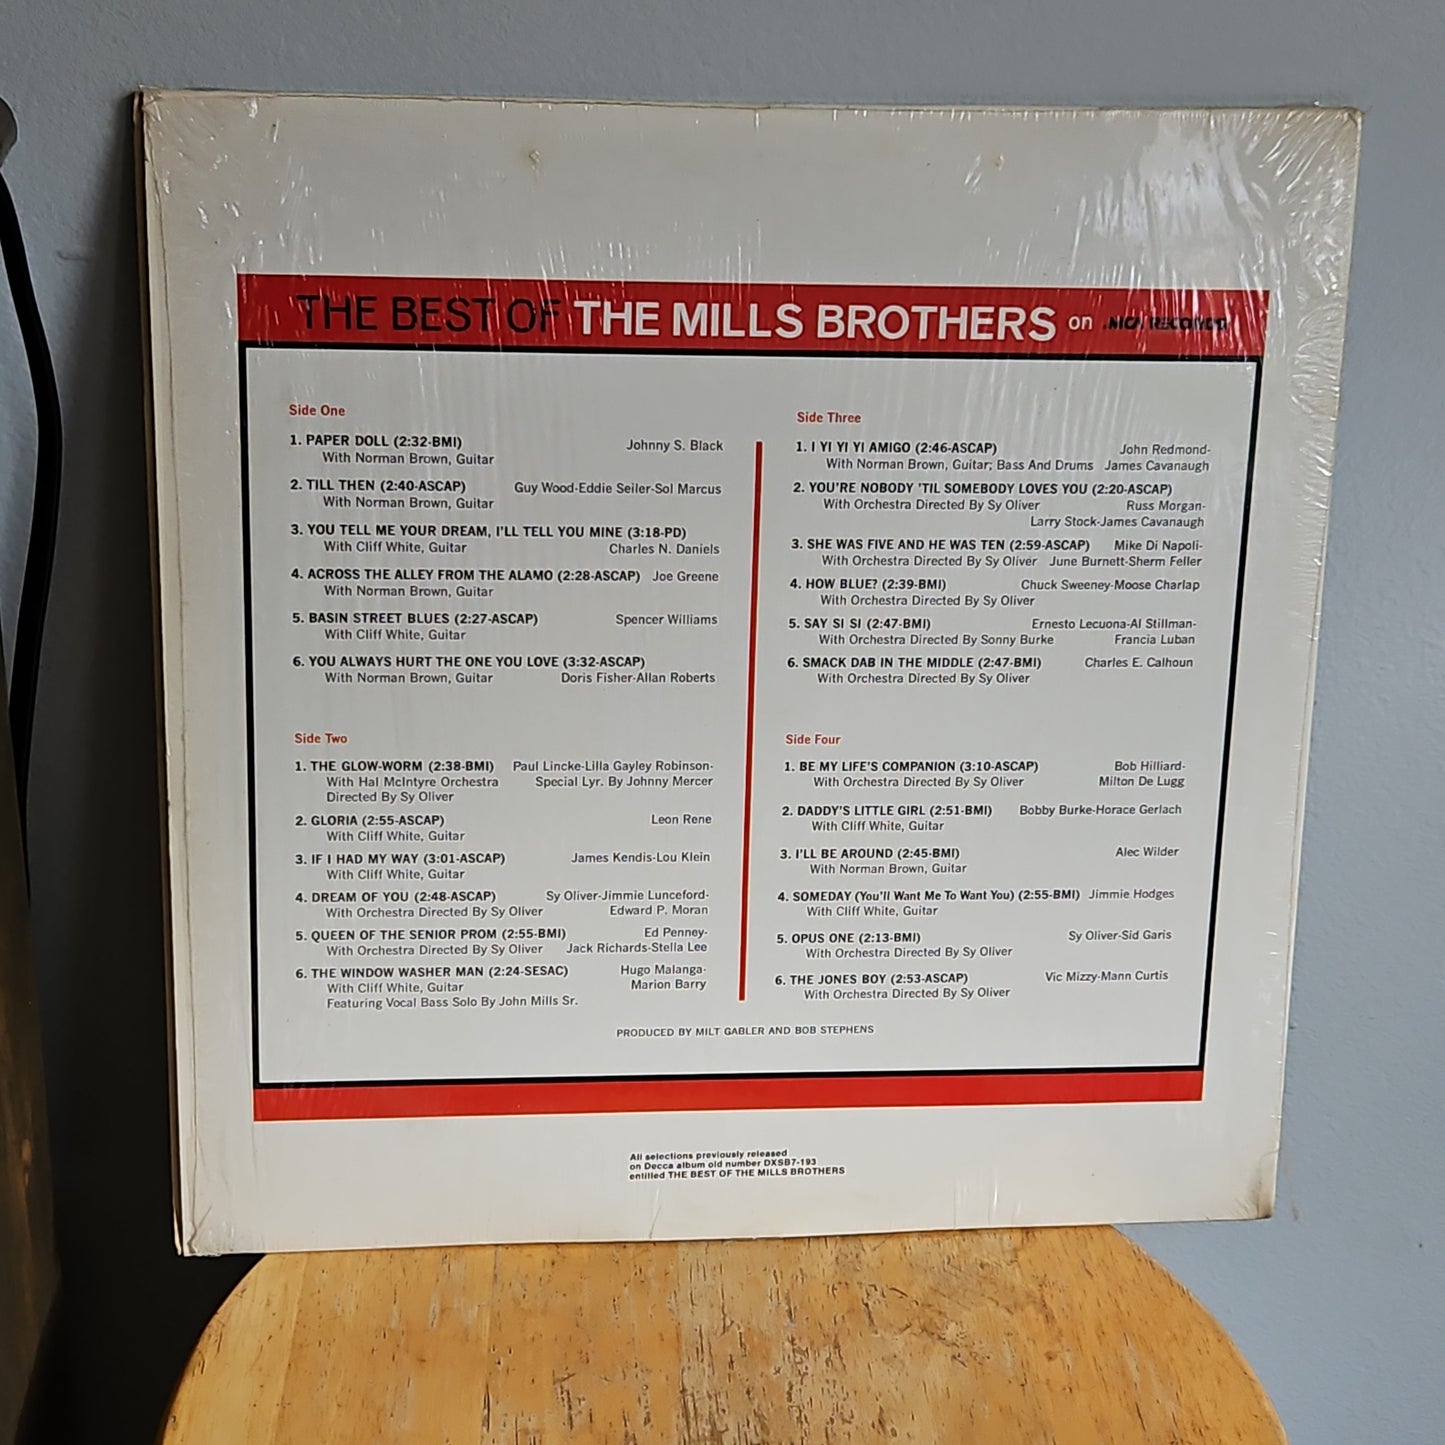 The Best of The Mills Brothers By MCA Records